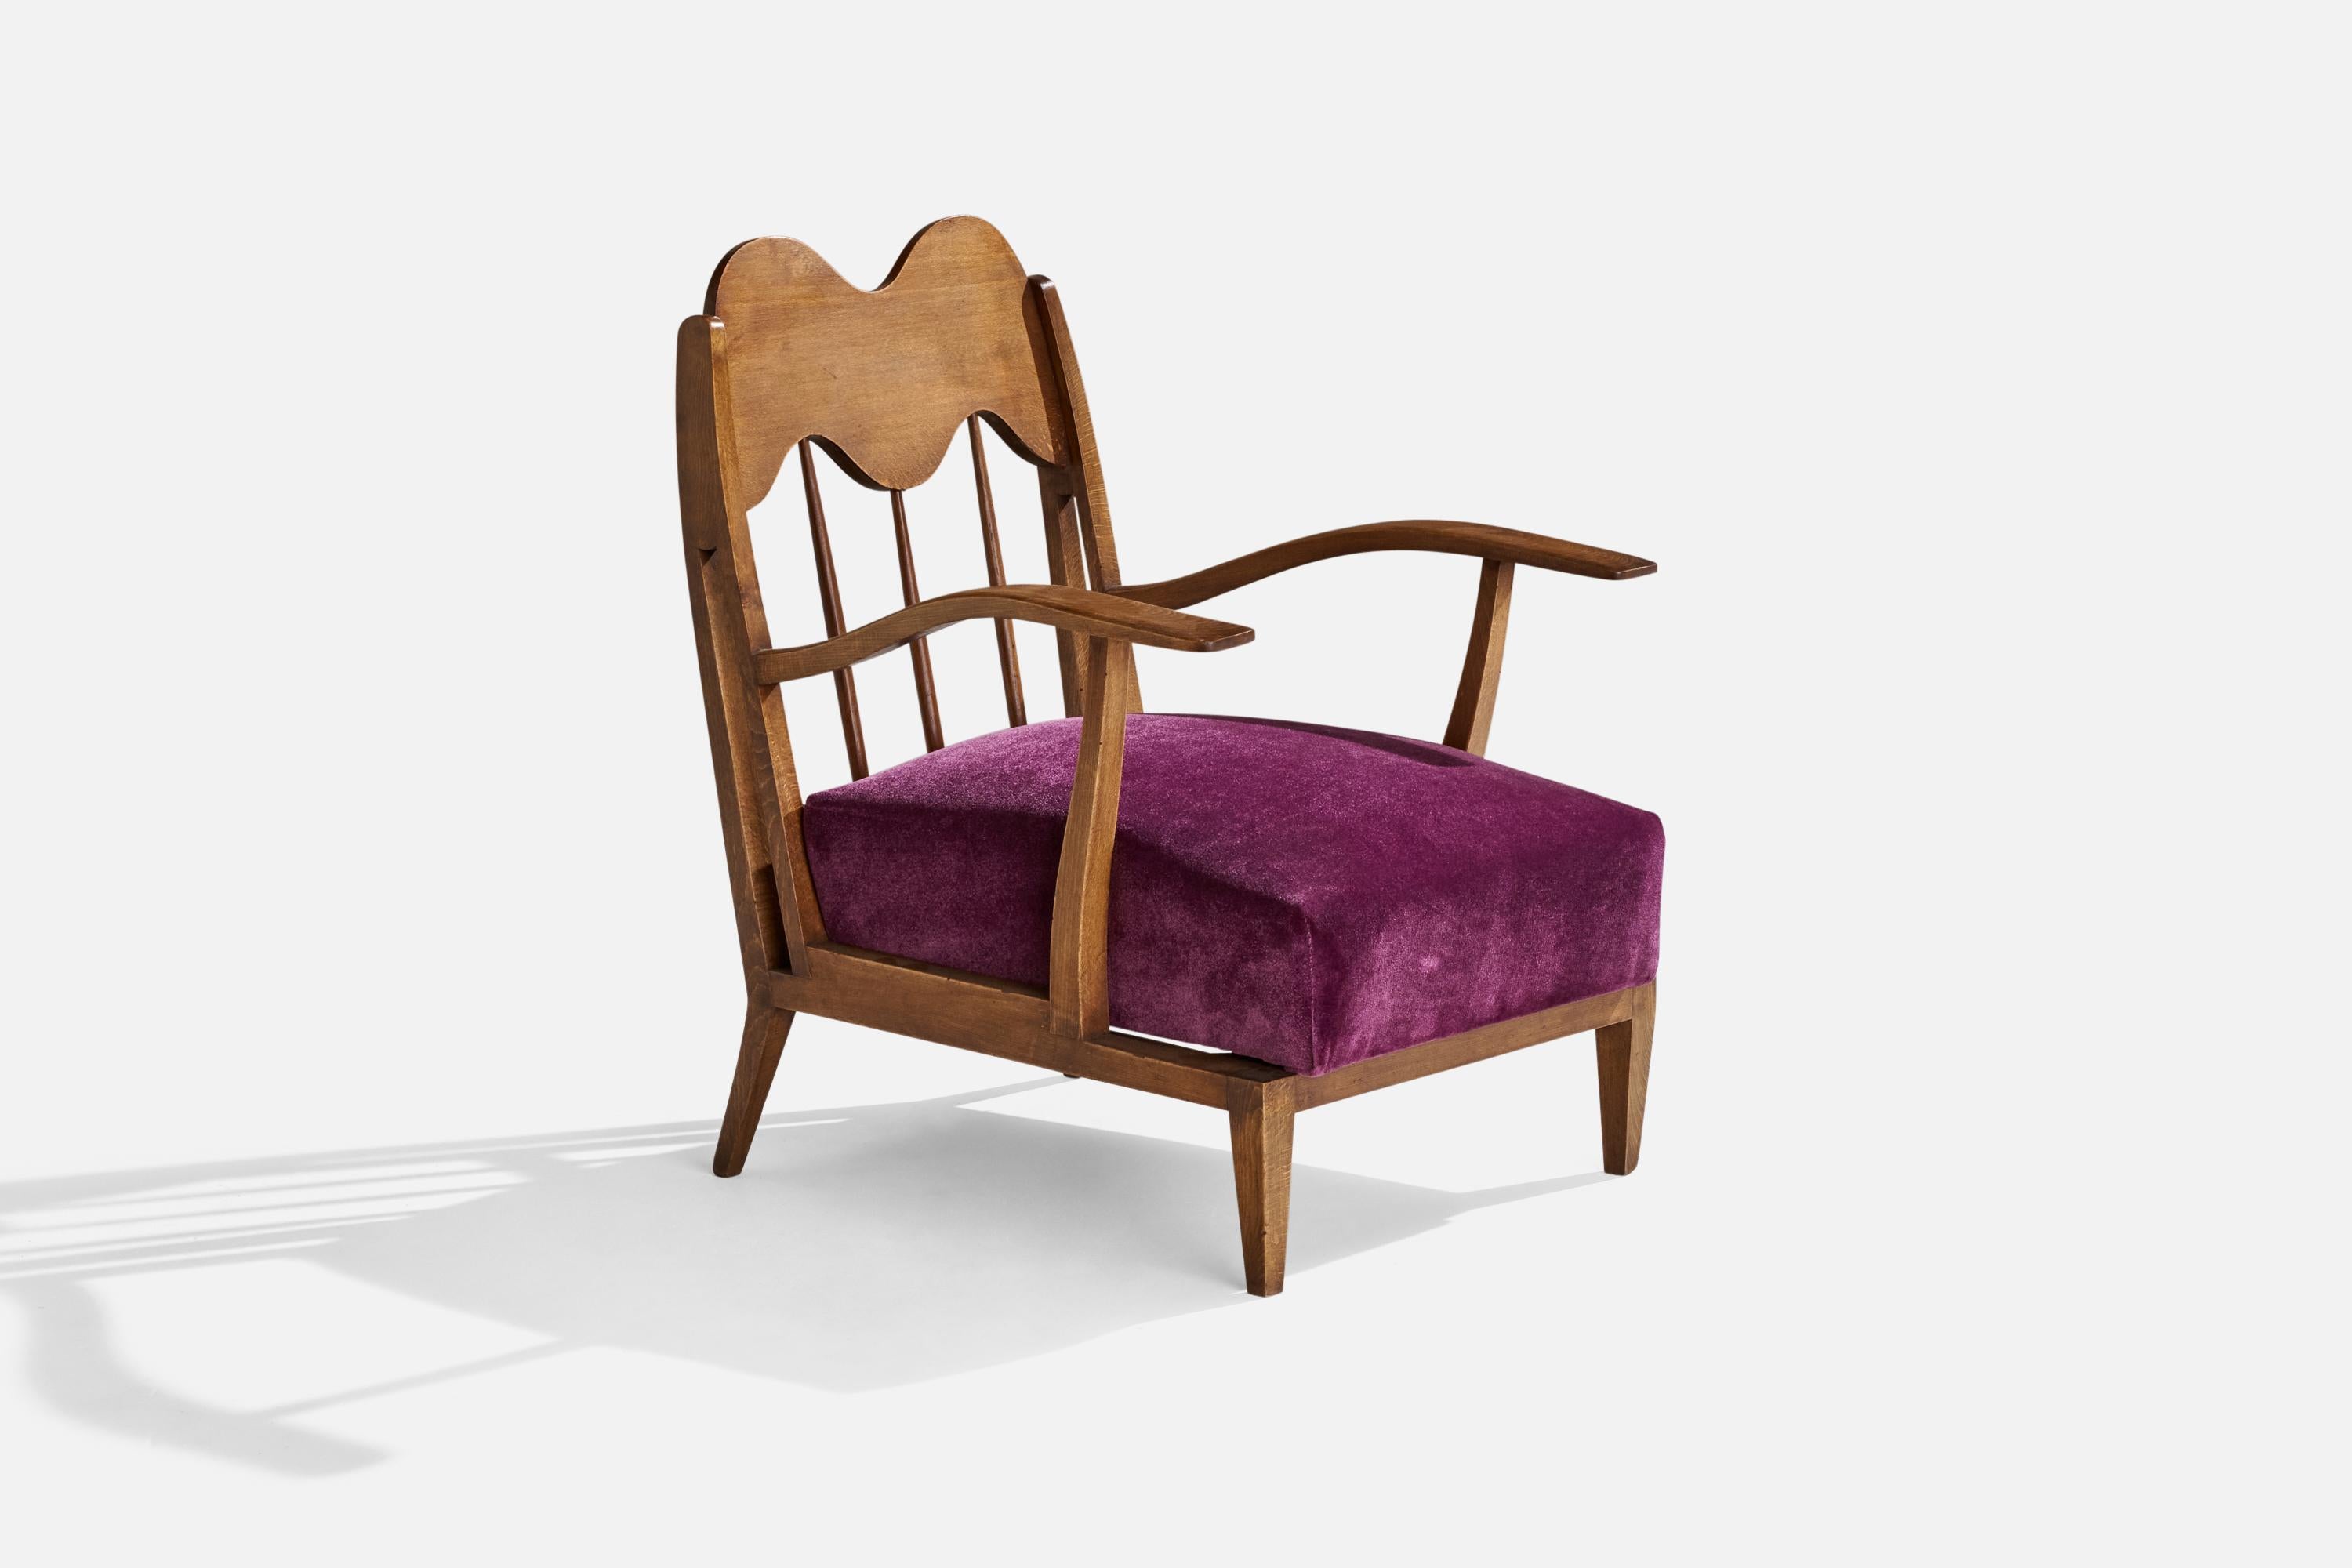 A walnut and purple velvet lounge chair designed and produced in Italy, c. 1940s.

Seat height: 13”